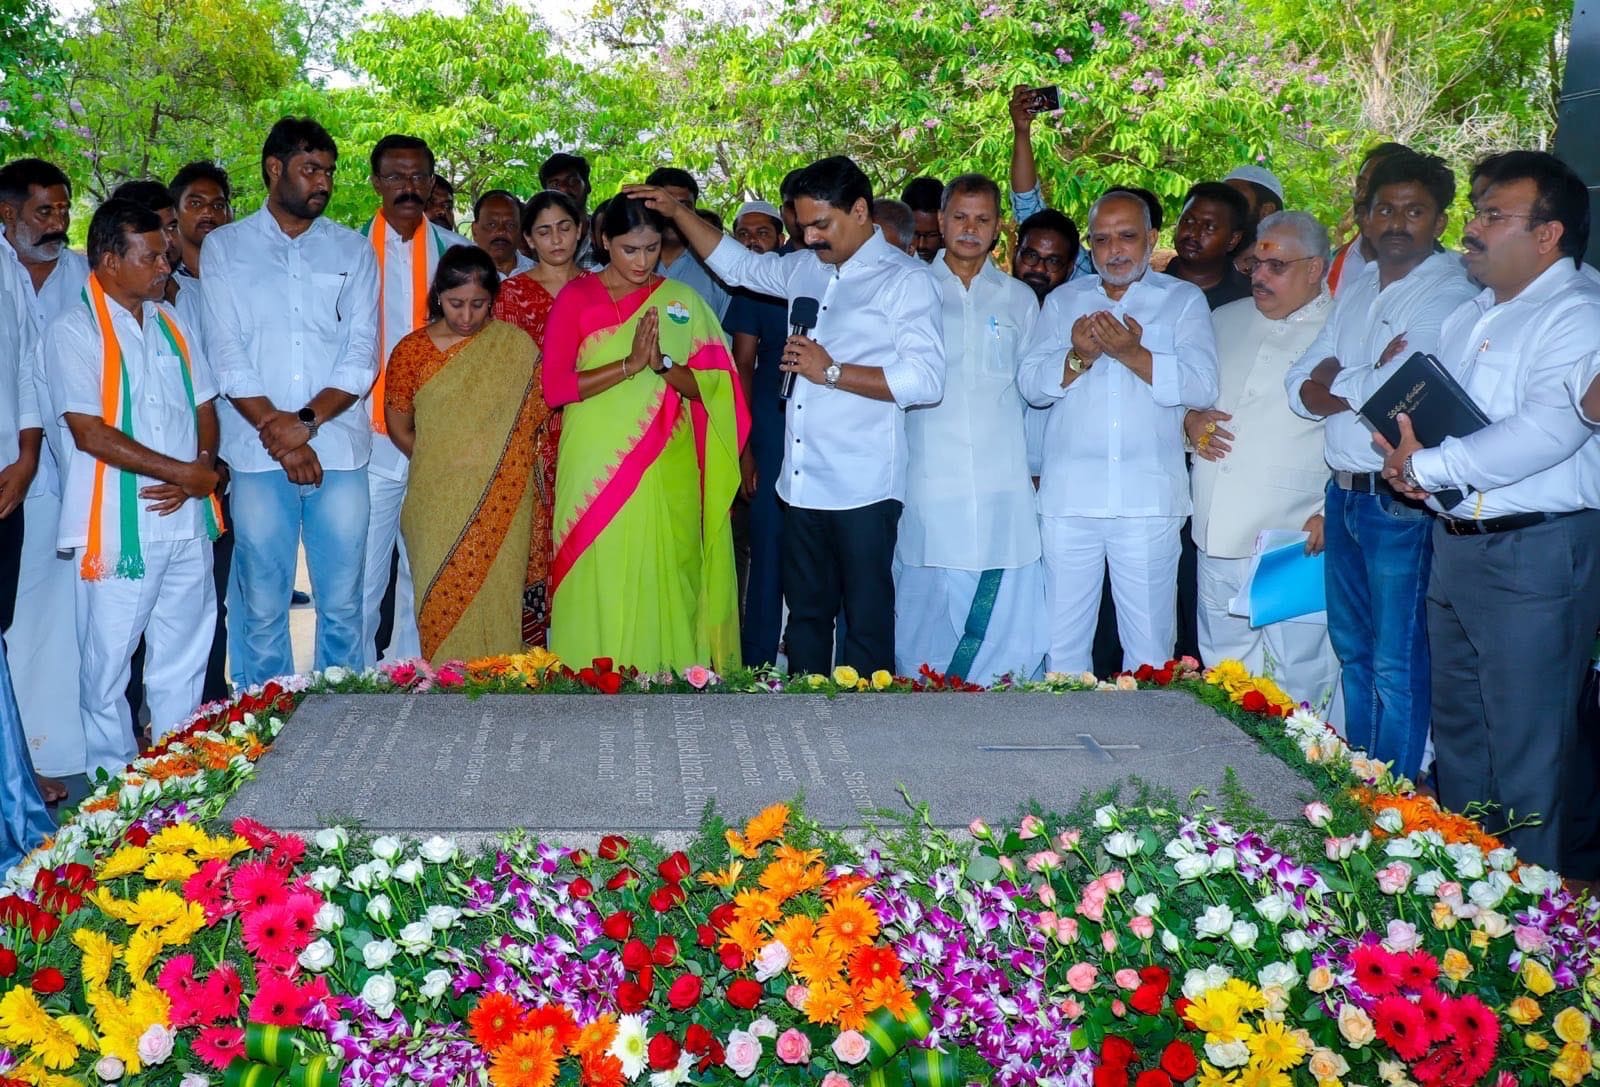 YS Sharmila prayed at her father Rajasekhar Reddy’s grave before filing the nomination papers. (X)